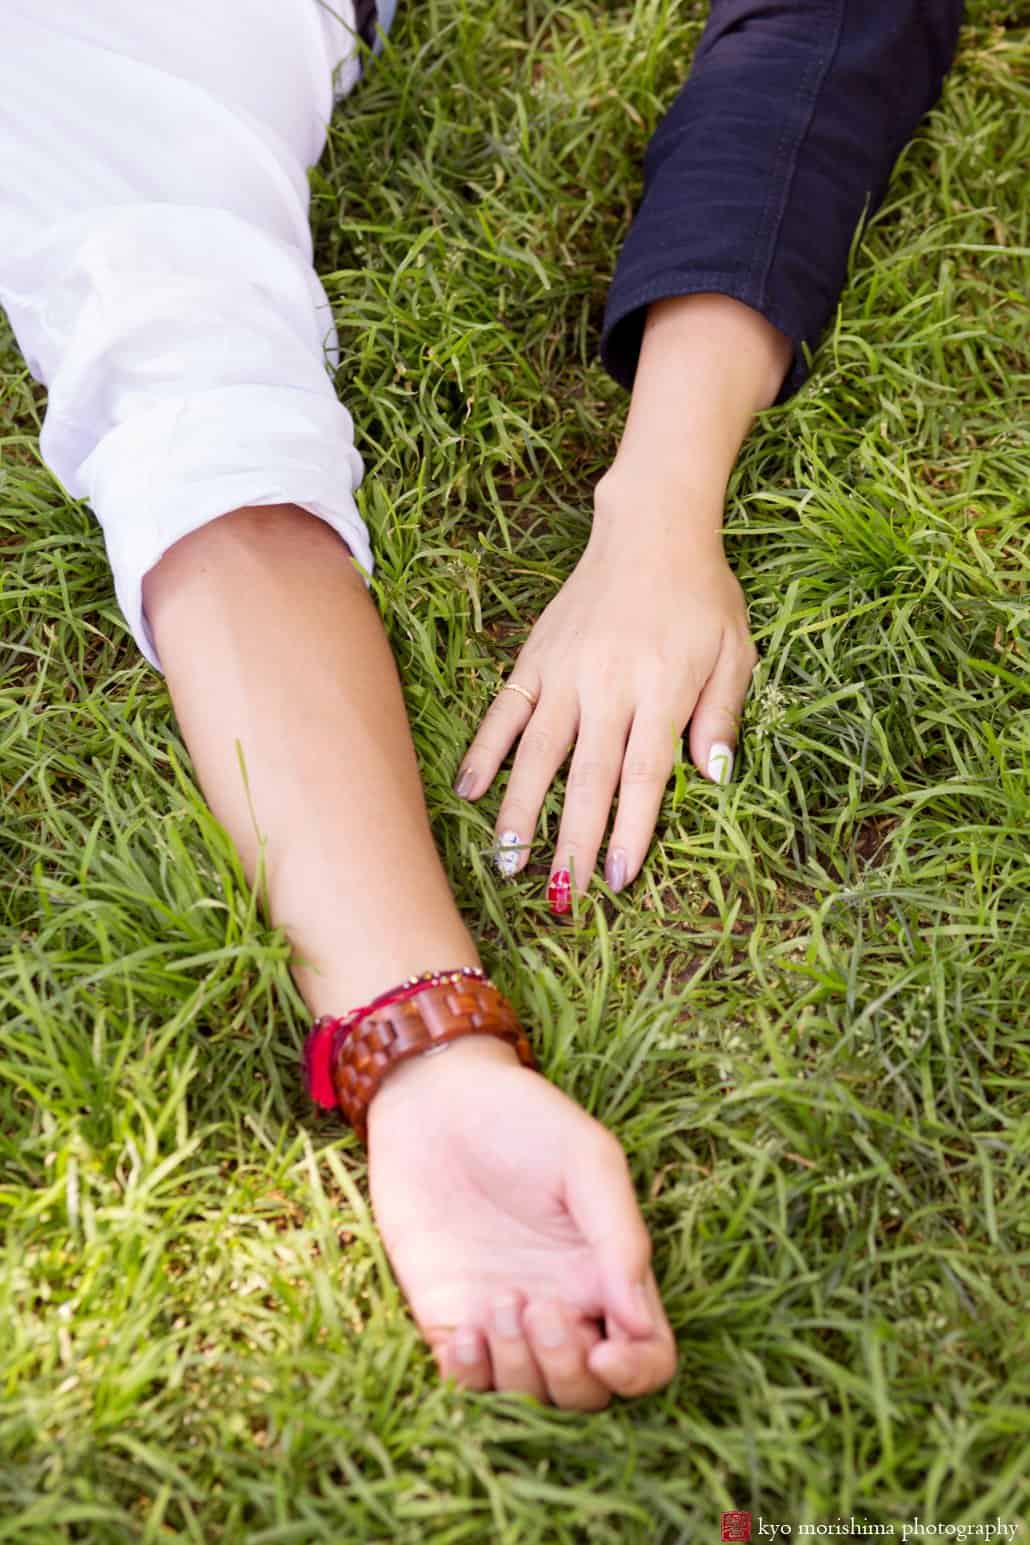 Man and woman's hands outstretched on the grass photographed by Kyo Morishima